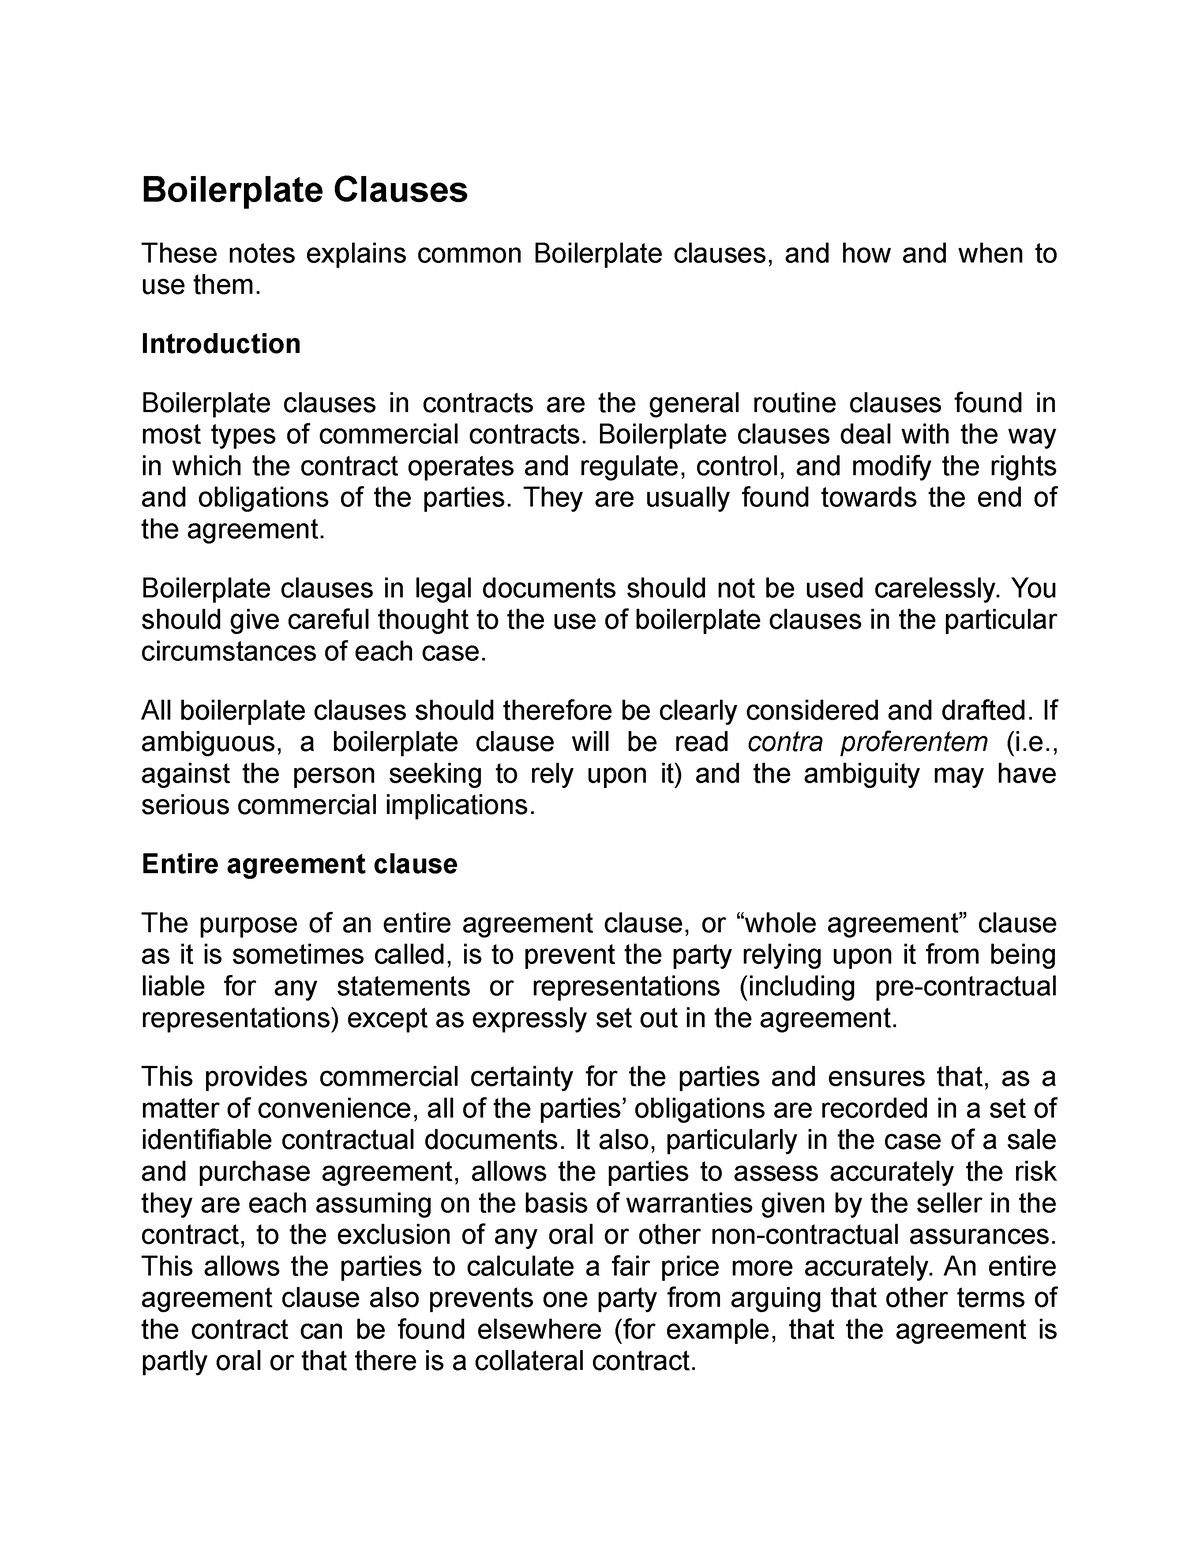 Boilerplate Clauses Introduction Boilerplate clauses in contracts are